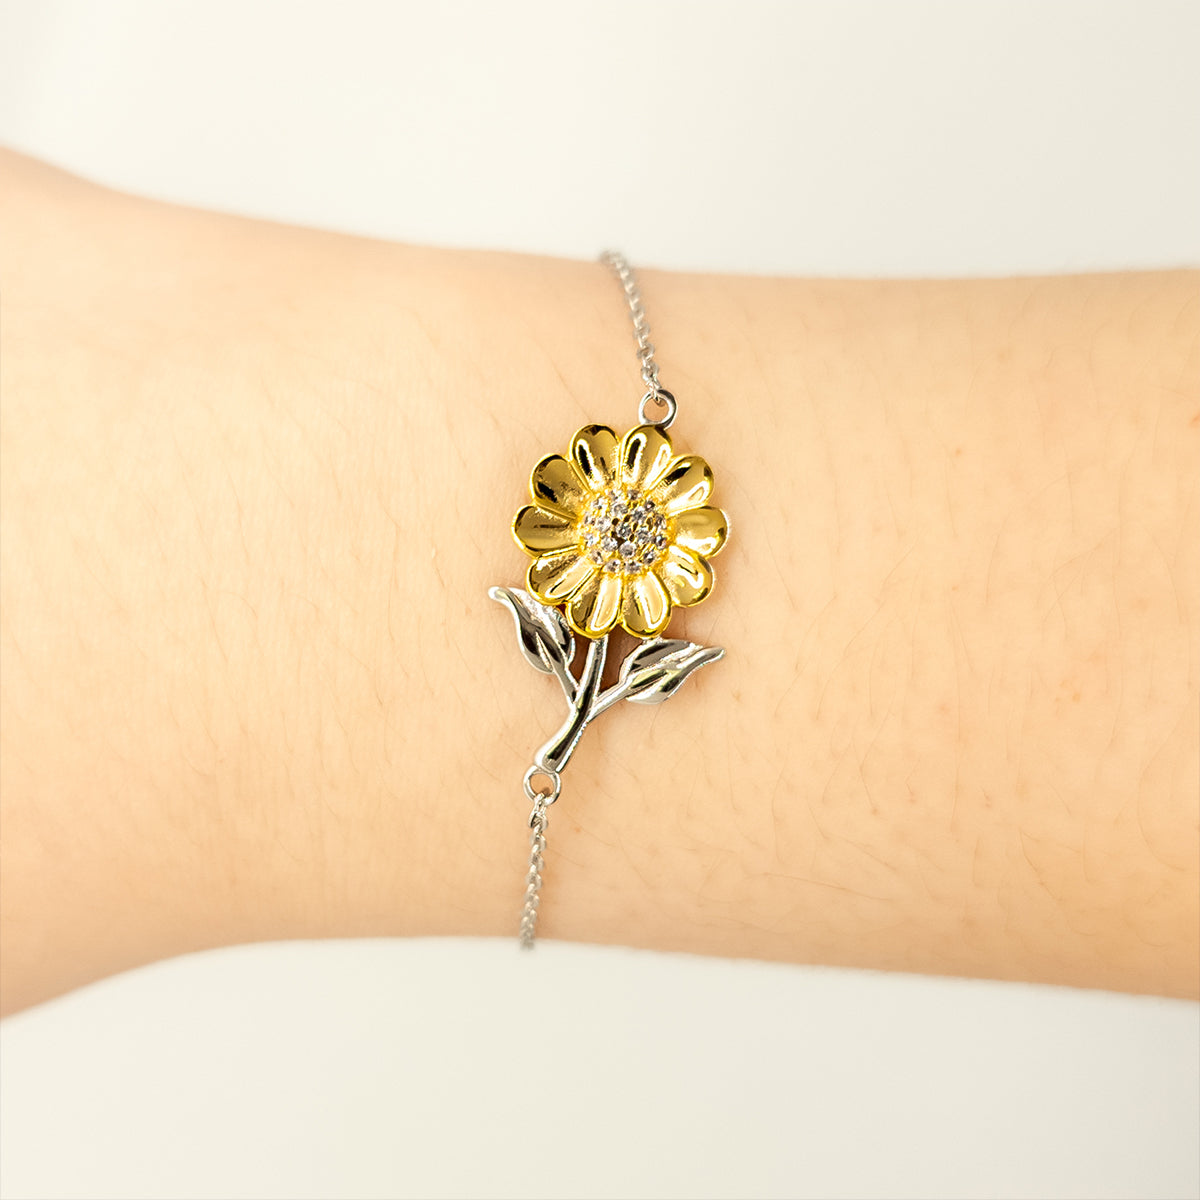 Funny Paramedic Mom Gifts, The best kind of MOM raises Paramedic, Birthday, Mother's Day, Cute Sunflower Bracelet for Paramedic Mom